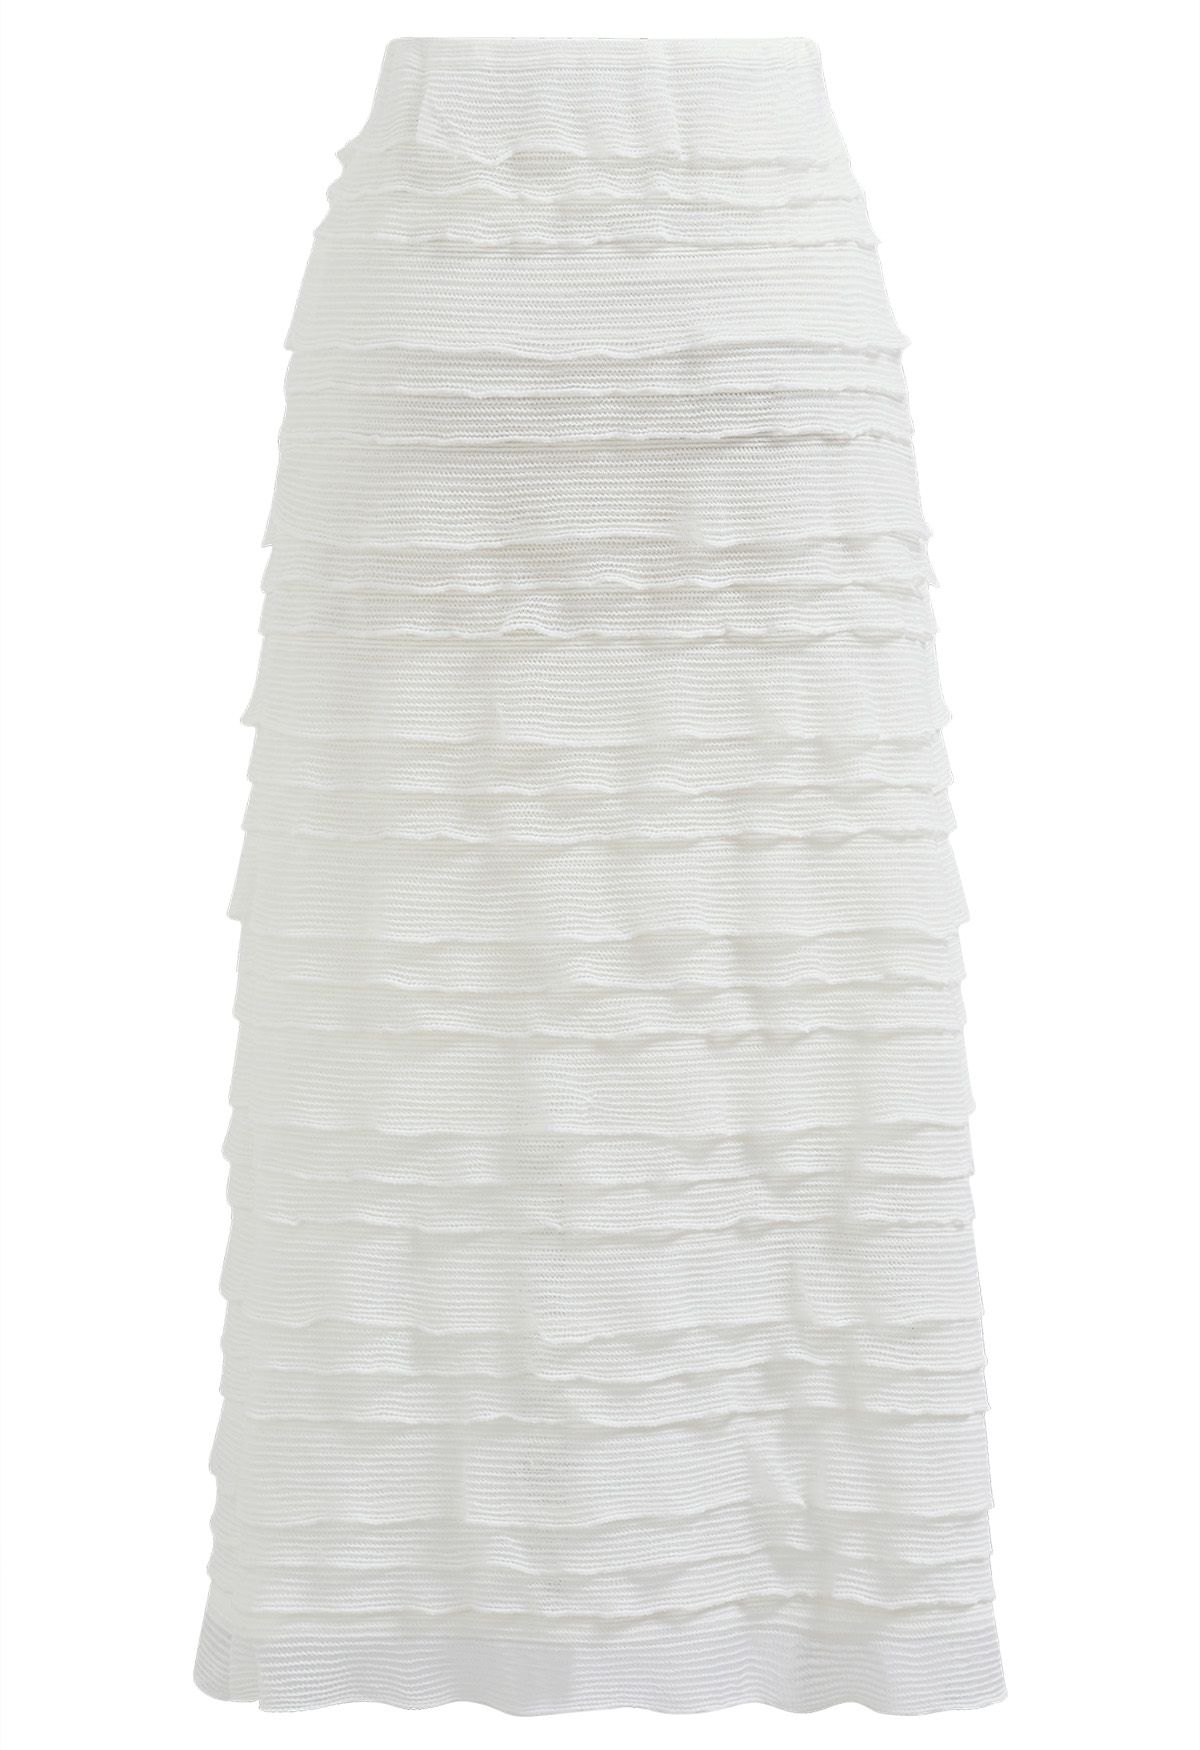 White Ruffle Tiered Knit Pencil Skirt